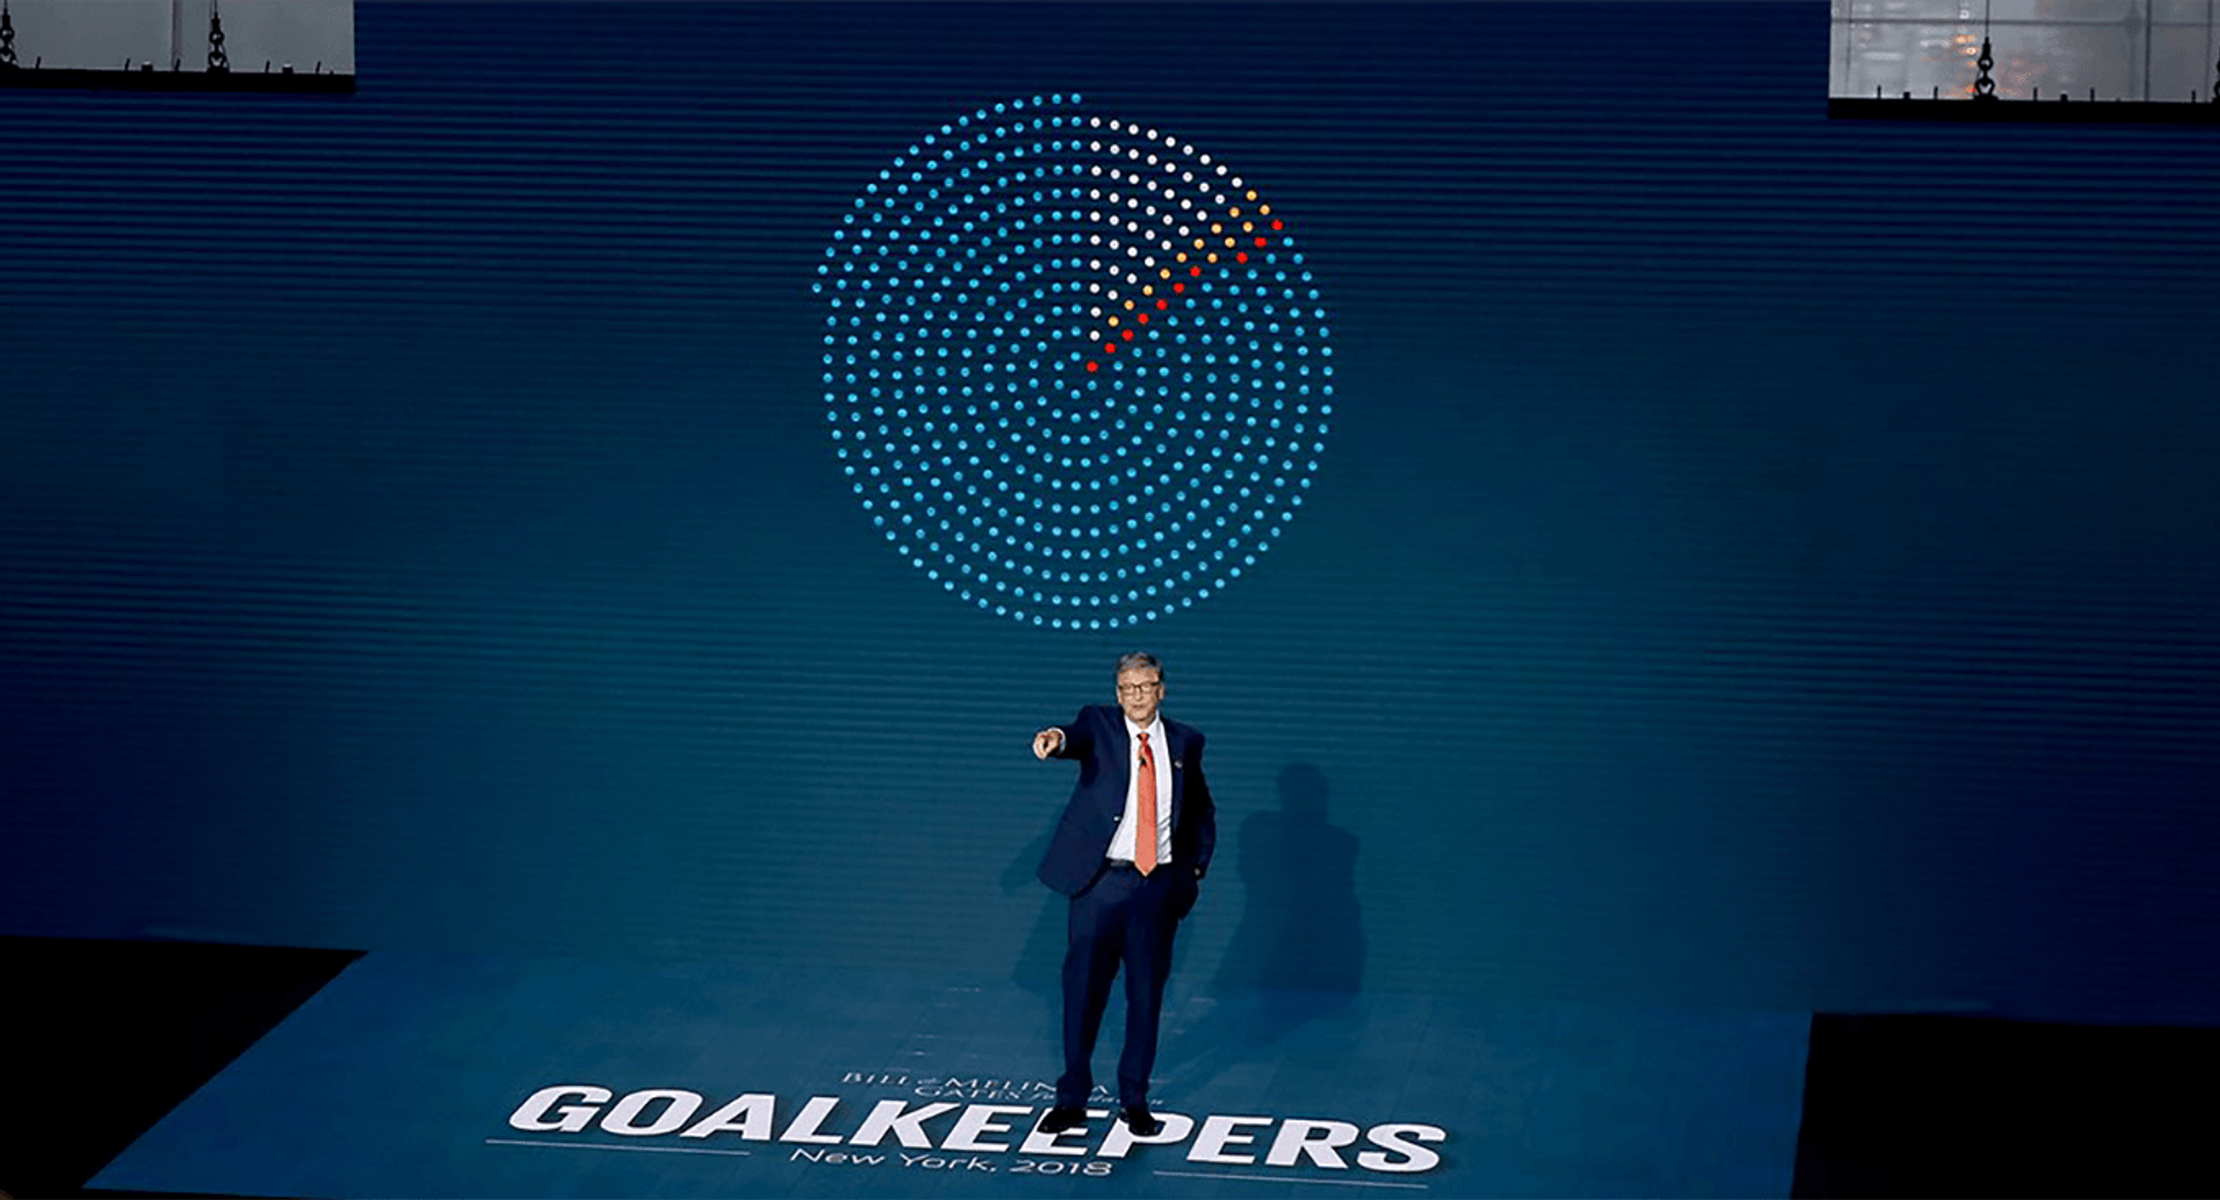 A photograph taken of Bill Gates on stage speaking at a Goalkeepers. Behind him is a pie chart made of dots. Beneath his feet is the word 'Goalkeepers' in larger white letters.